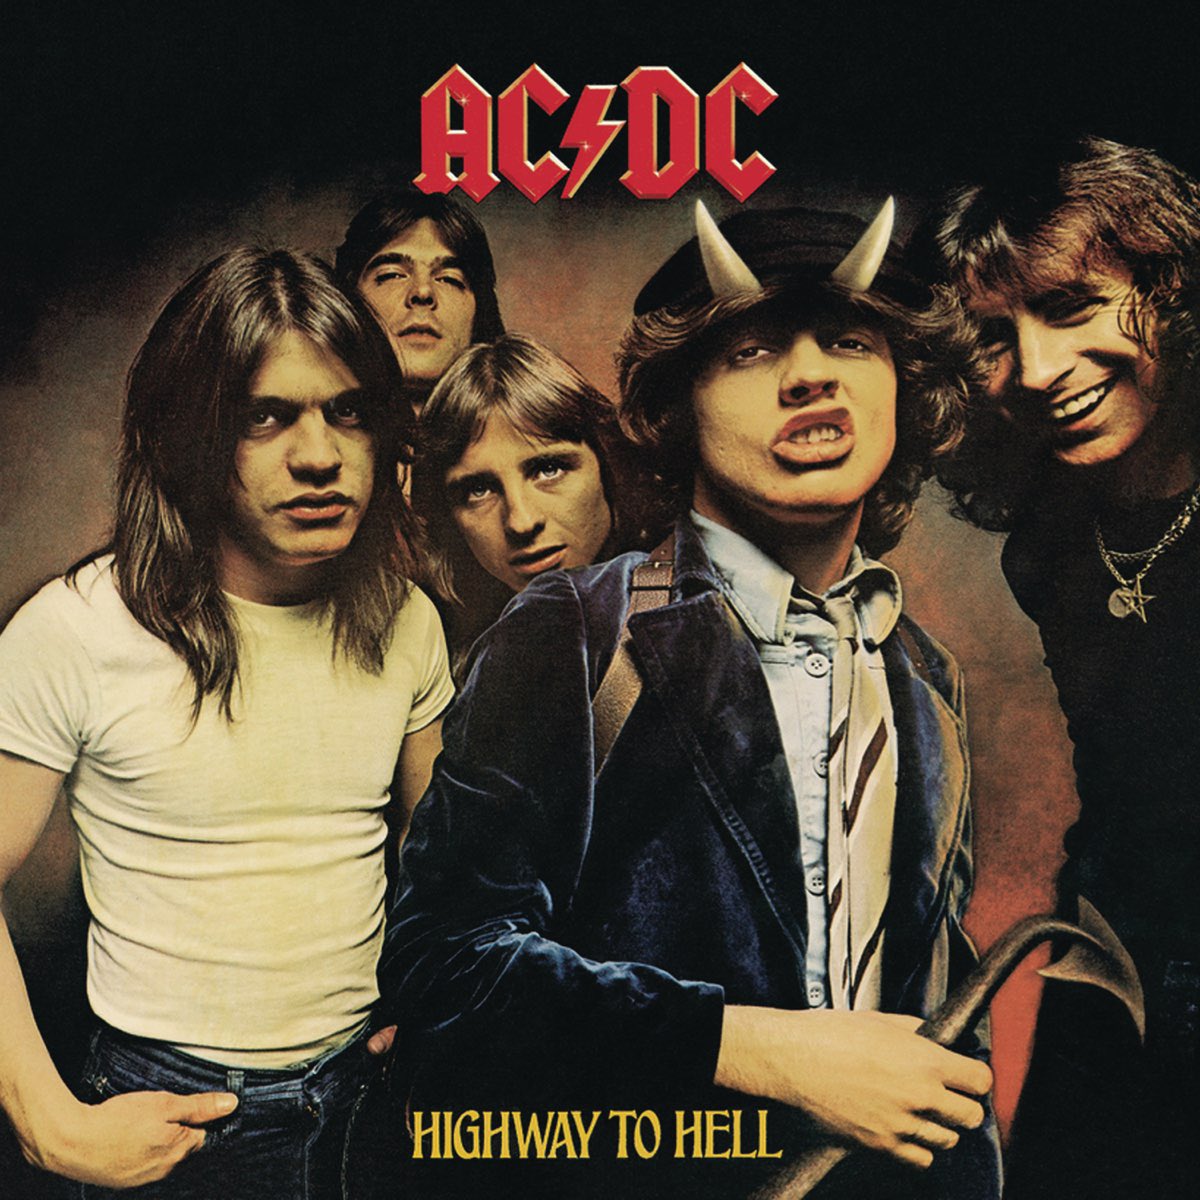 Is Highway to Hell better than Back in Black ??

What are your favorite songs off of this great album ??

#ACDC #HighwayToHell 
#hardrock #arenarock
#BonScott #band #guitar #album #vinyl #cd #music #MusicIsLife #hornsup